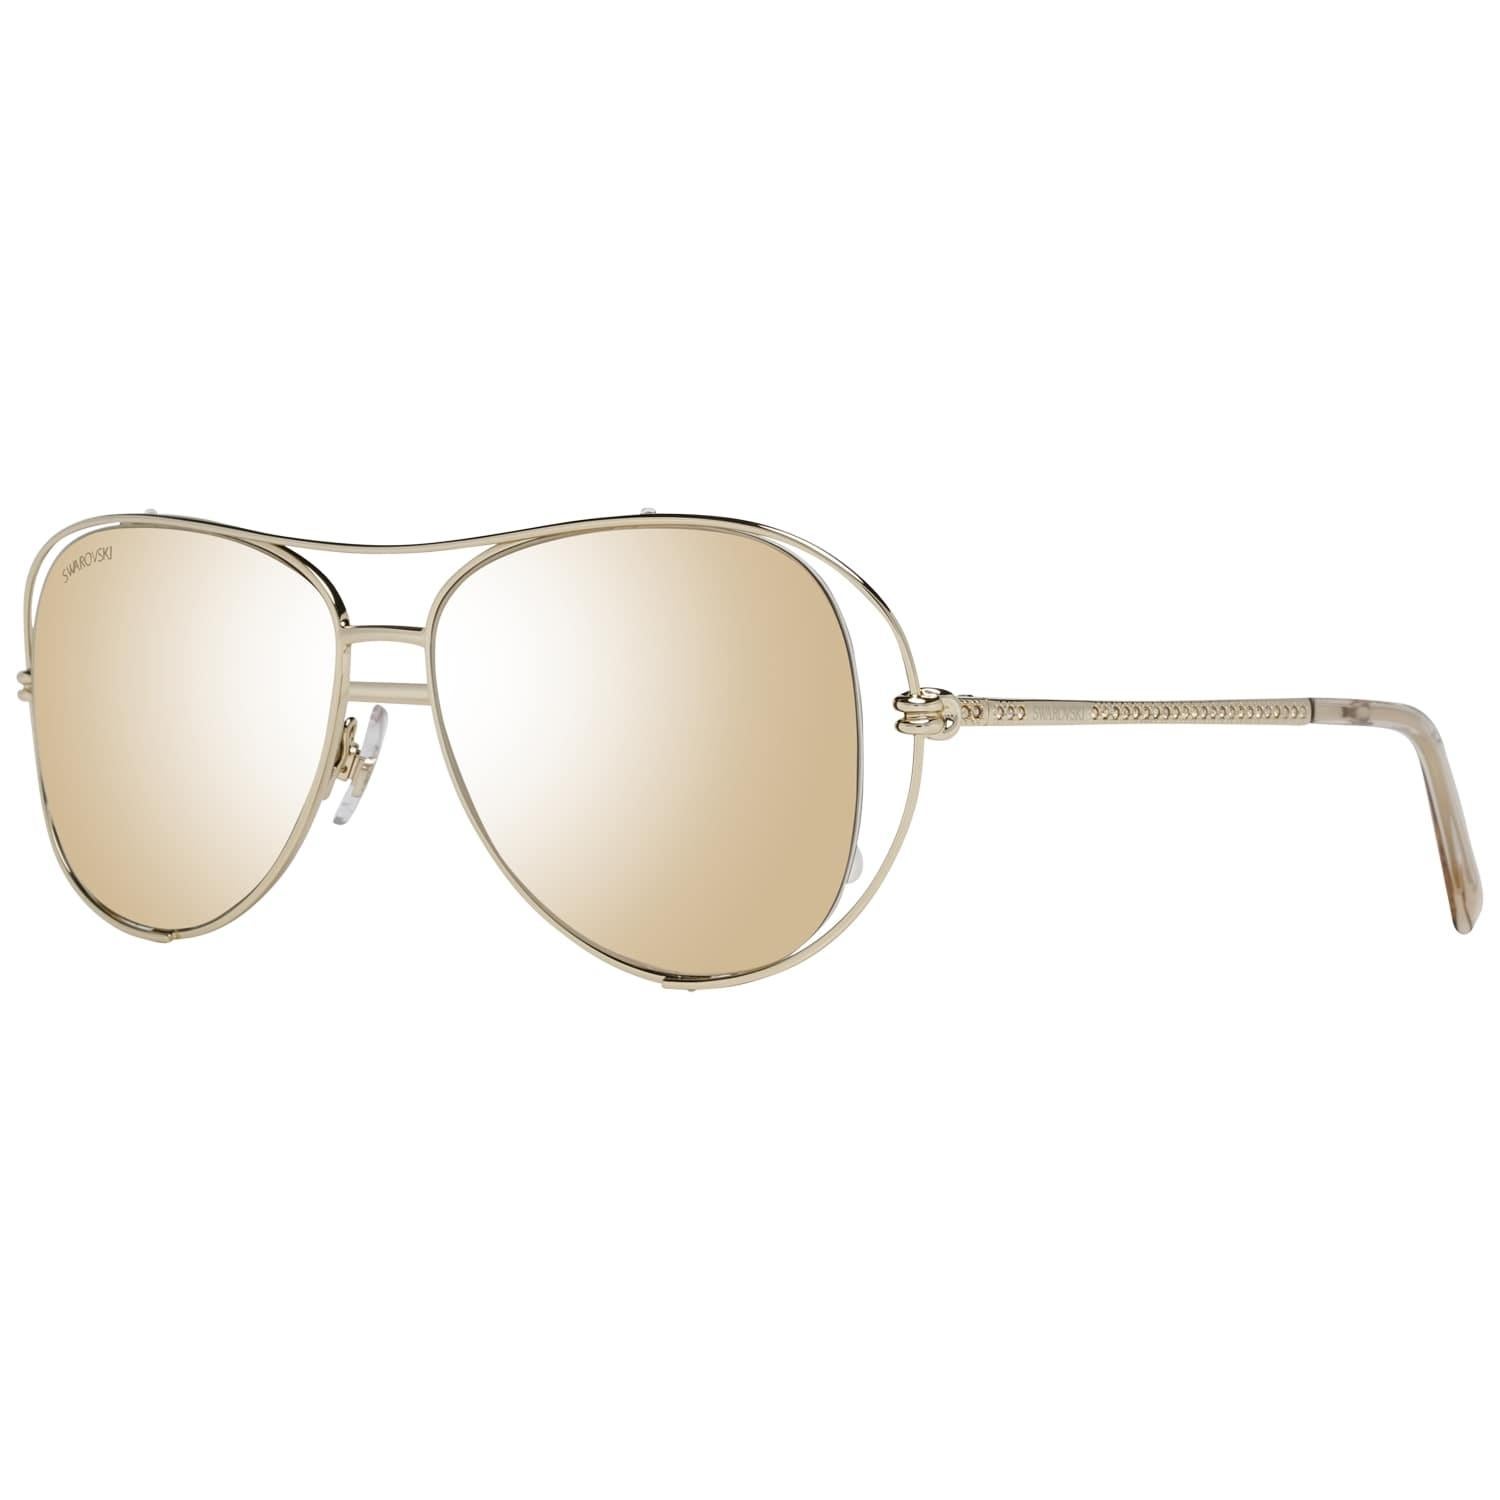 DetailsMATERIAL: MetalCOLOR: GoldMODEL: SK0231 5532GGENDER: WomenCOUNTRY OF MANUFACTURE: ChinaTYPE: SunglassesORIGINAL CASE?: YesSTYLE: AviatorOCCASION: CasualFEATURES: LightweightLENS COLOR: GoldLENS TECHNOLOGY: MirroredYEAR MANUFACTURED: